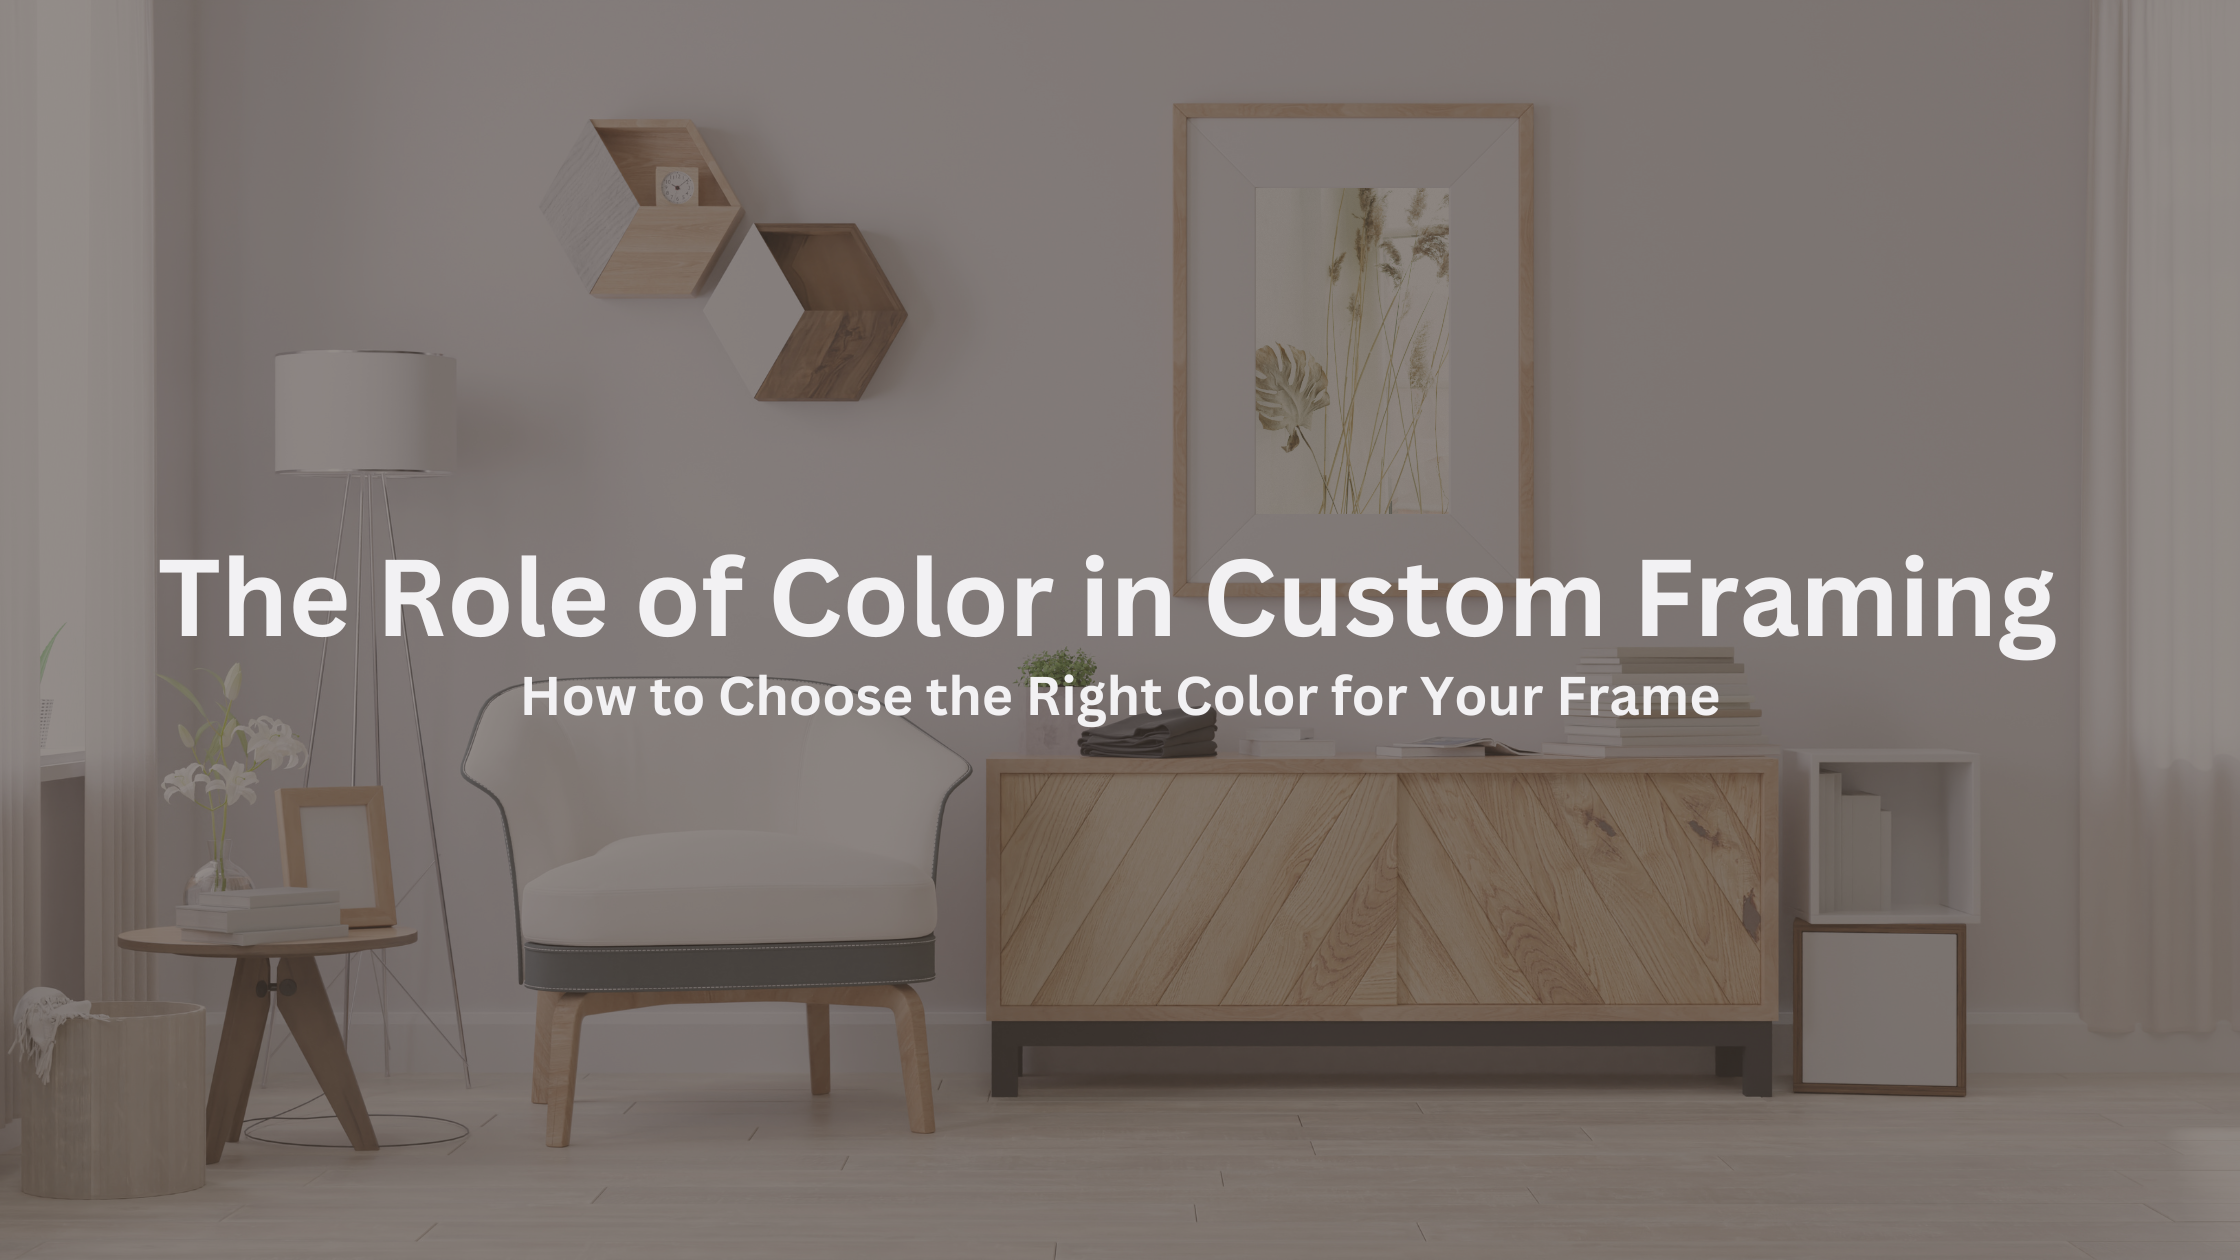 The Role of Color in Custom Framing: How to Choose the Right Color for Your Frame